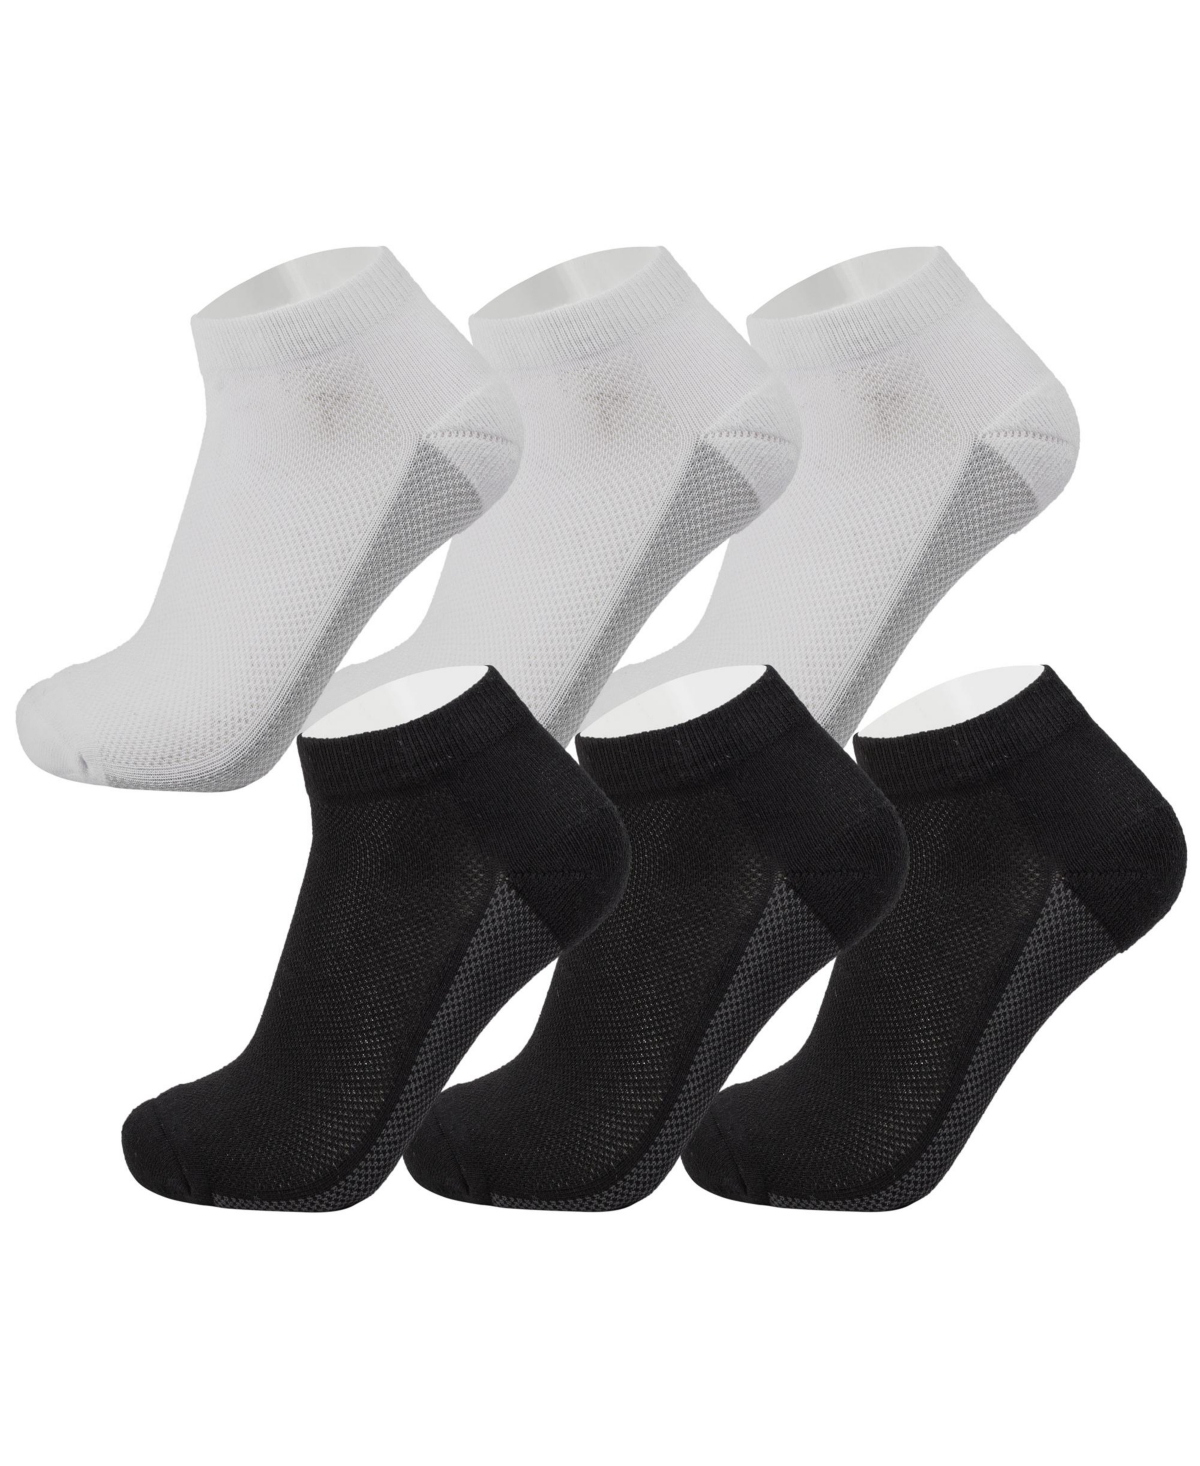 Men's Athletic Performance Low Cut Ankle Socks Cotton Multipack Sock - pack white